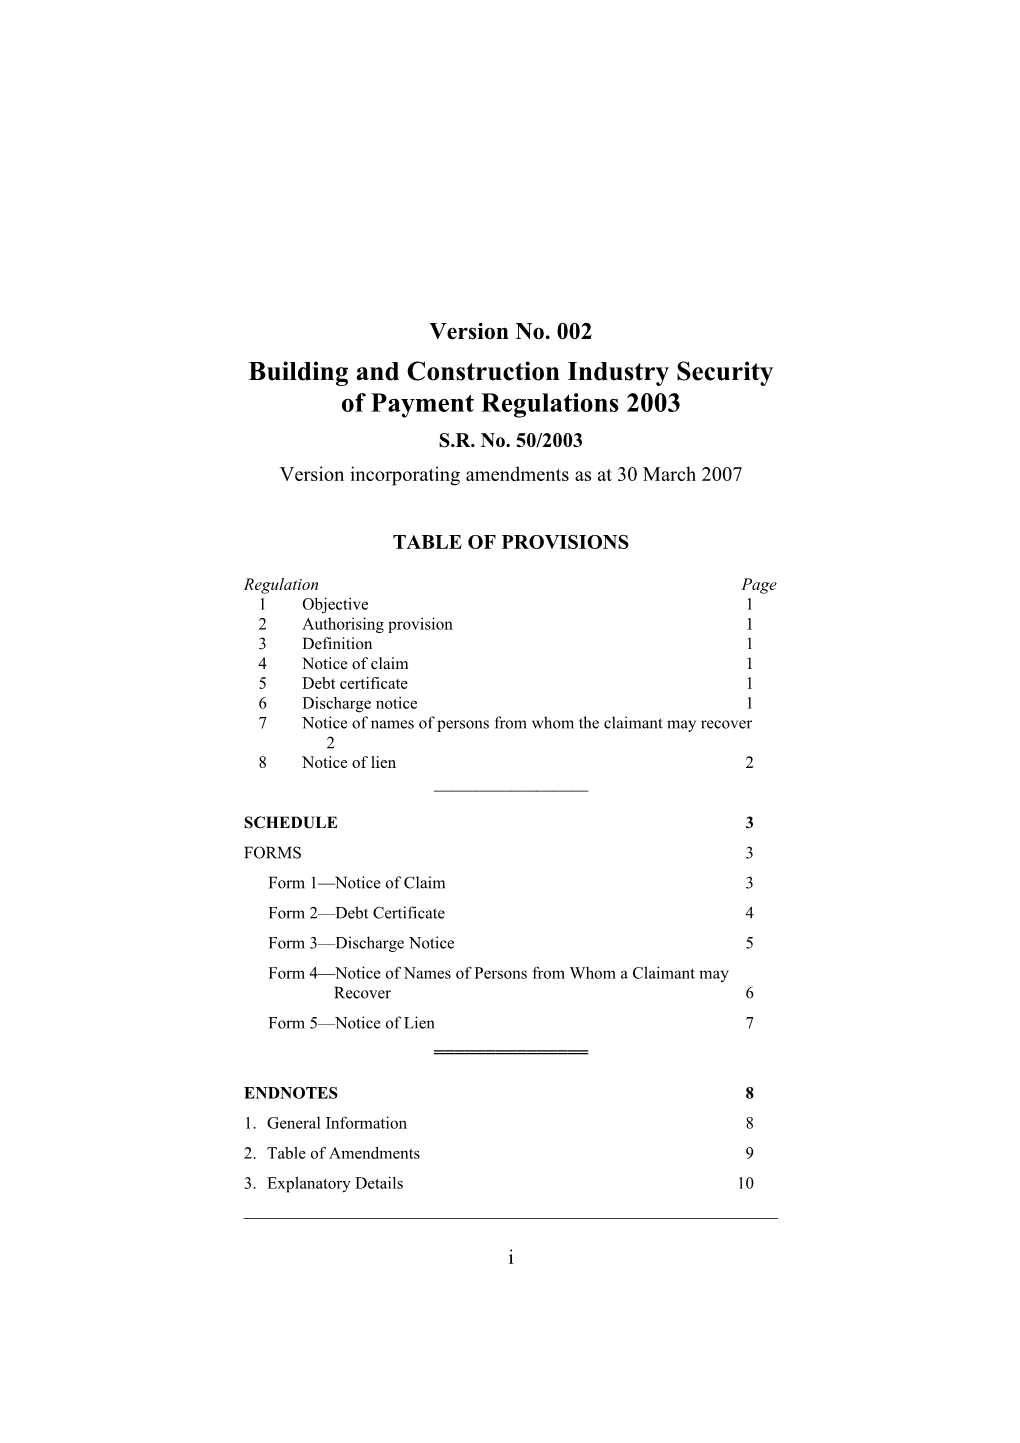 Building and Construction Industry Security of Payment Regulations 2003